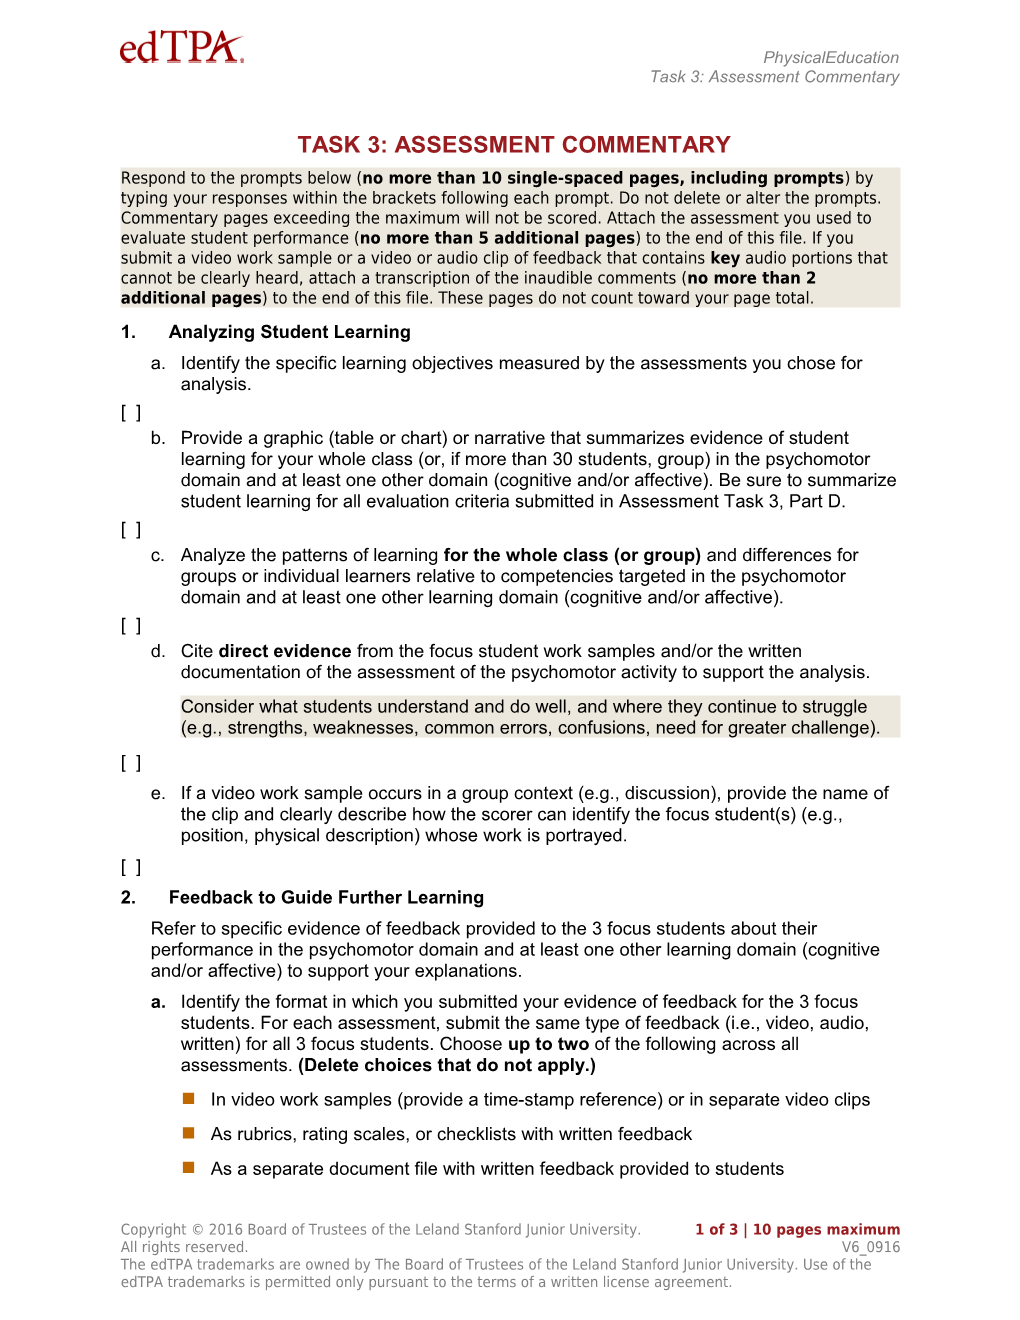 Assessment Commentary Template s1